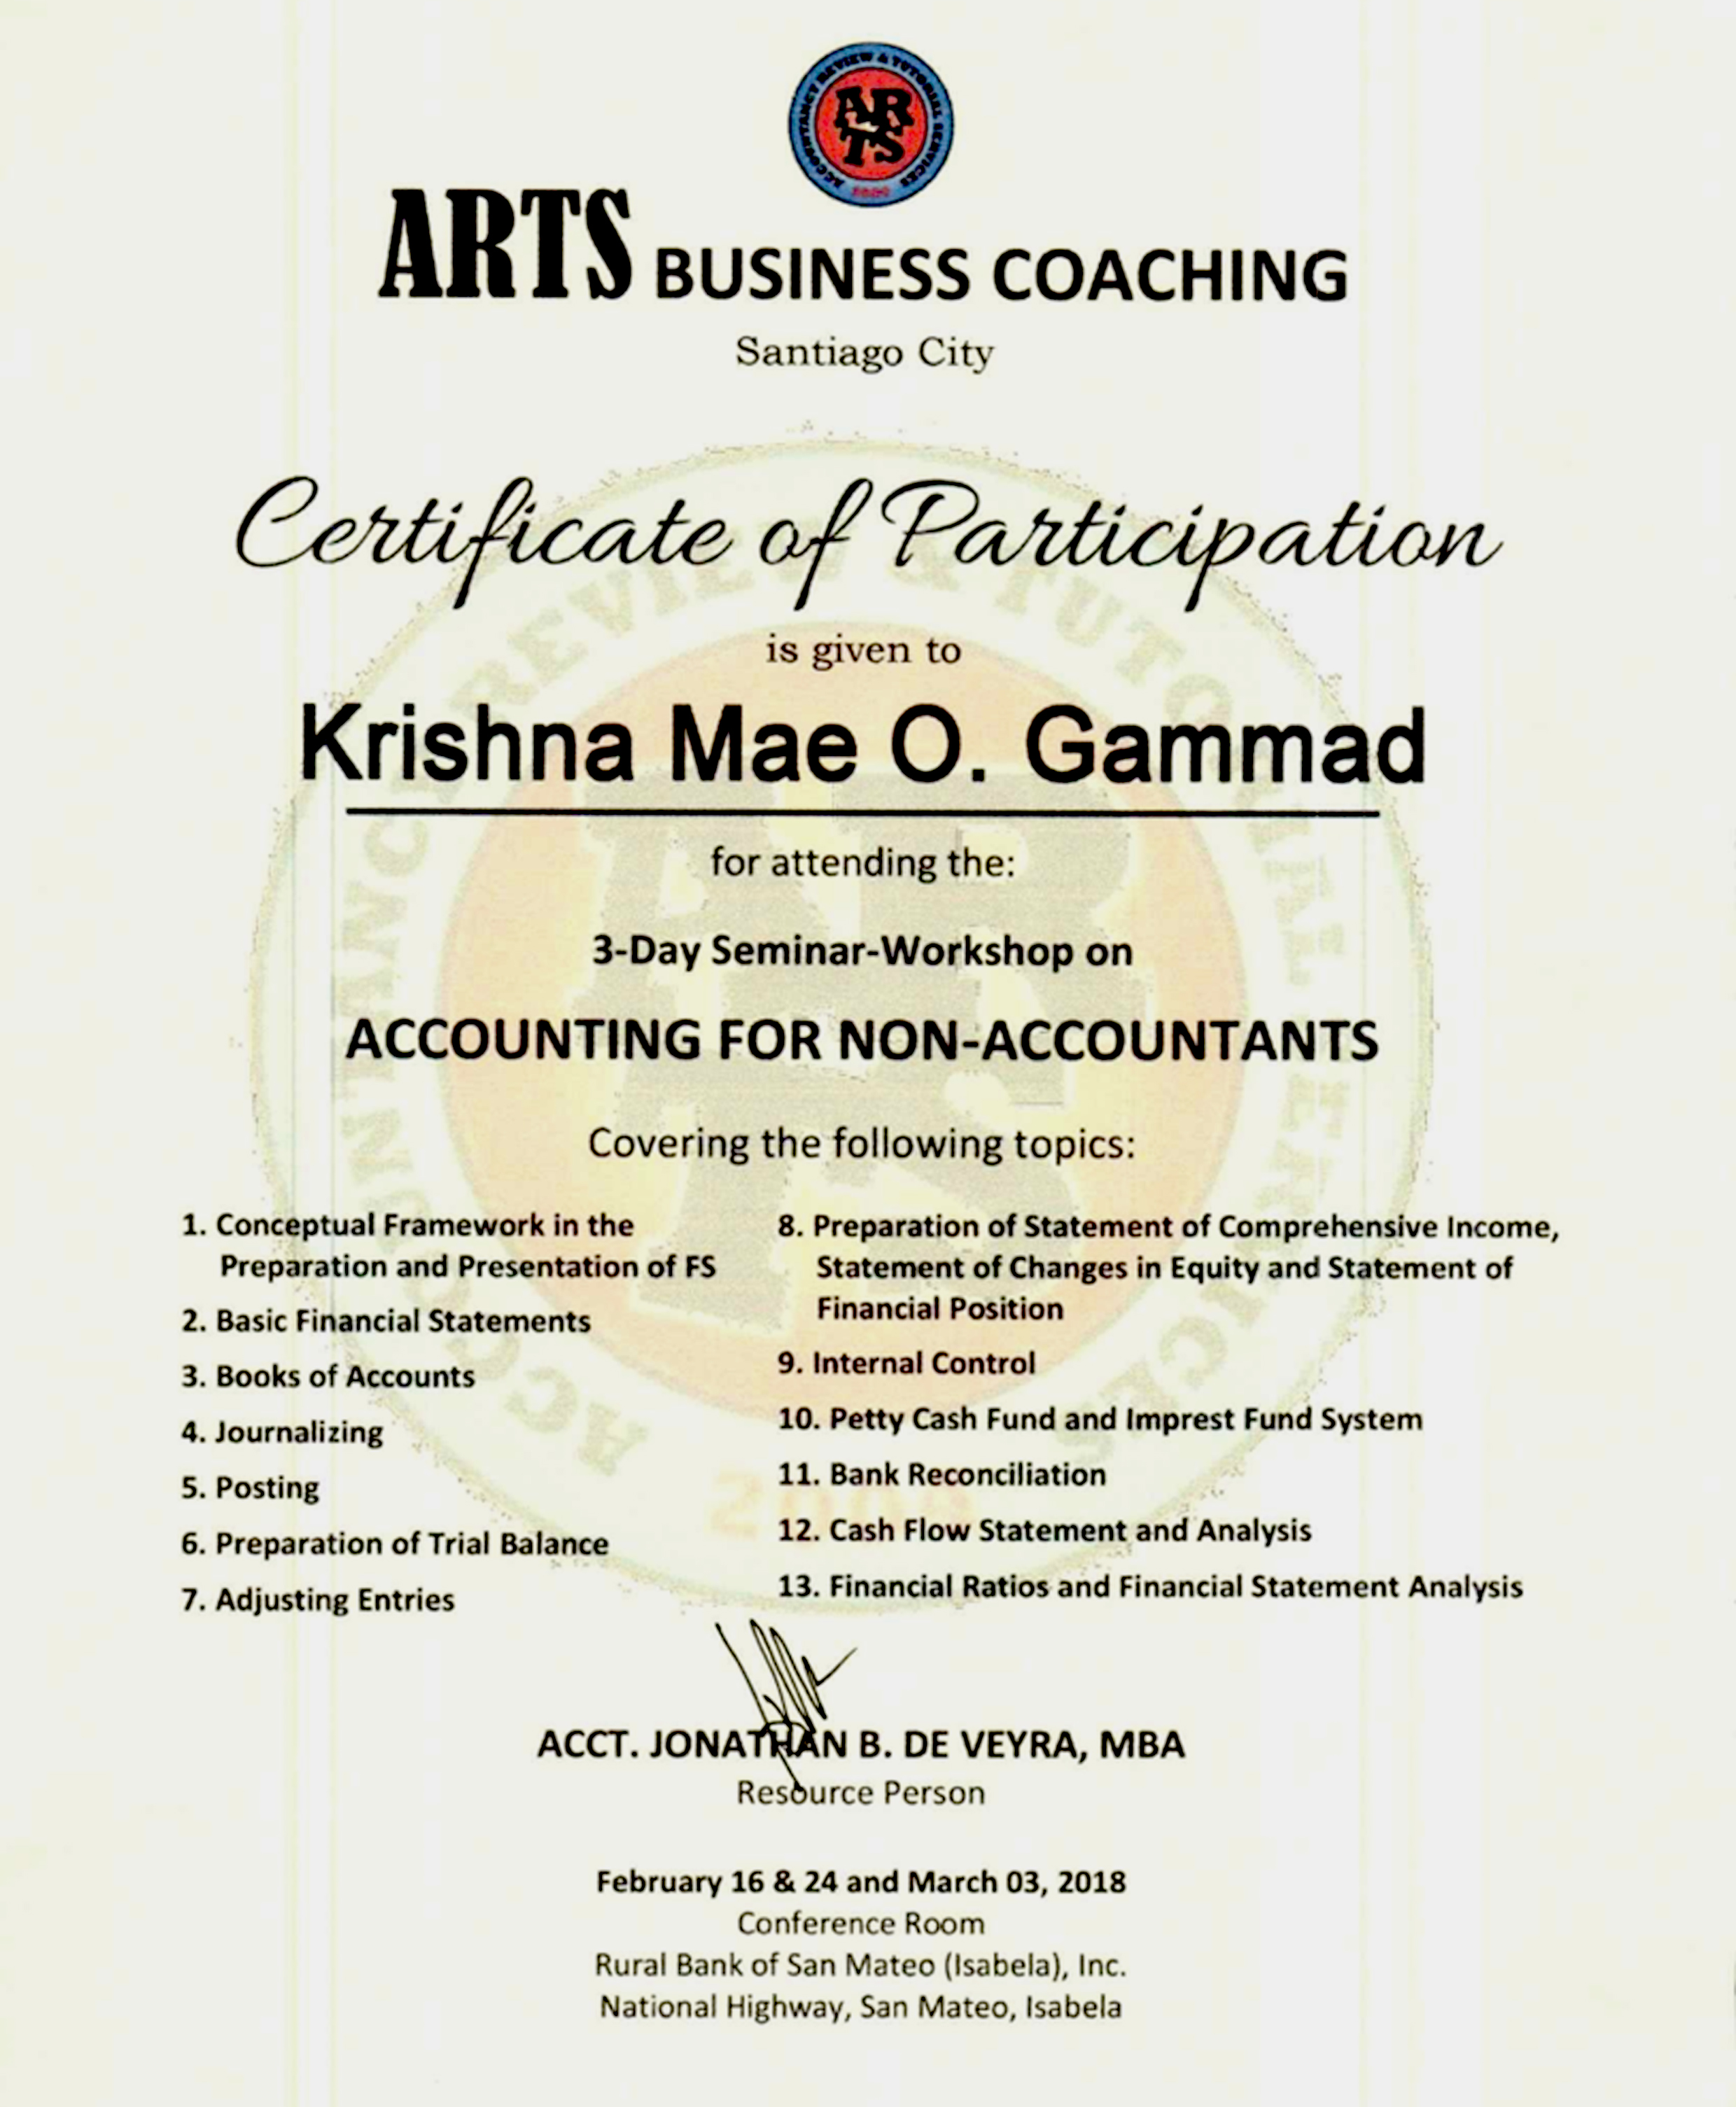 BUSINESS COACHING - ACCOUNTING FOR NON-ACCOUNTANTS